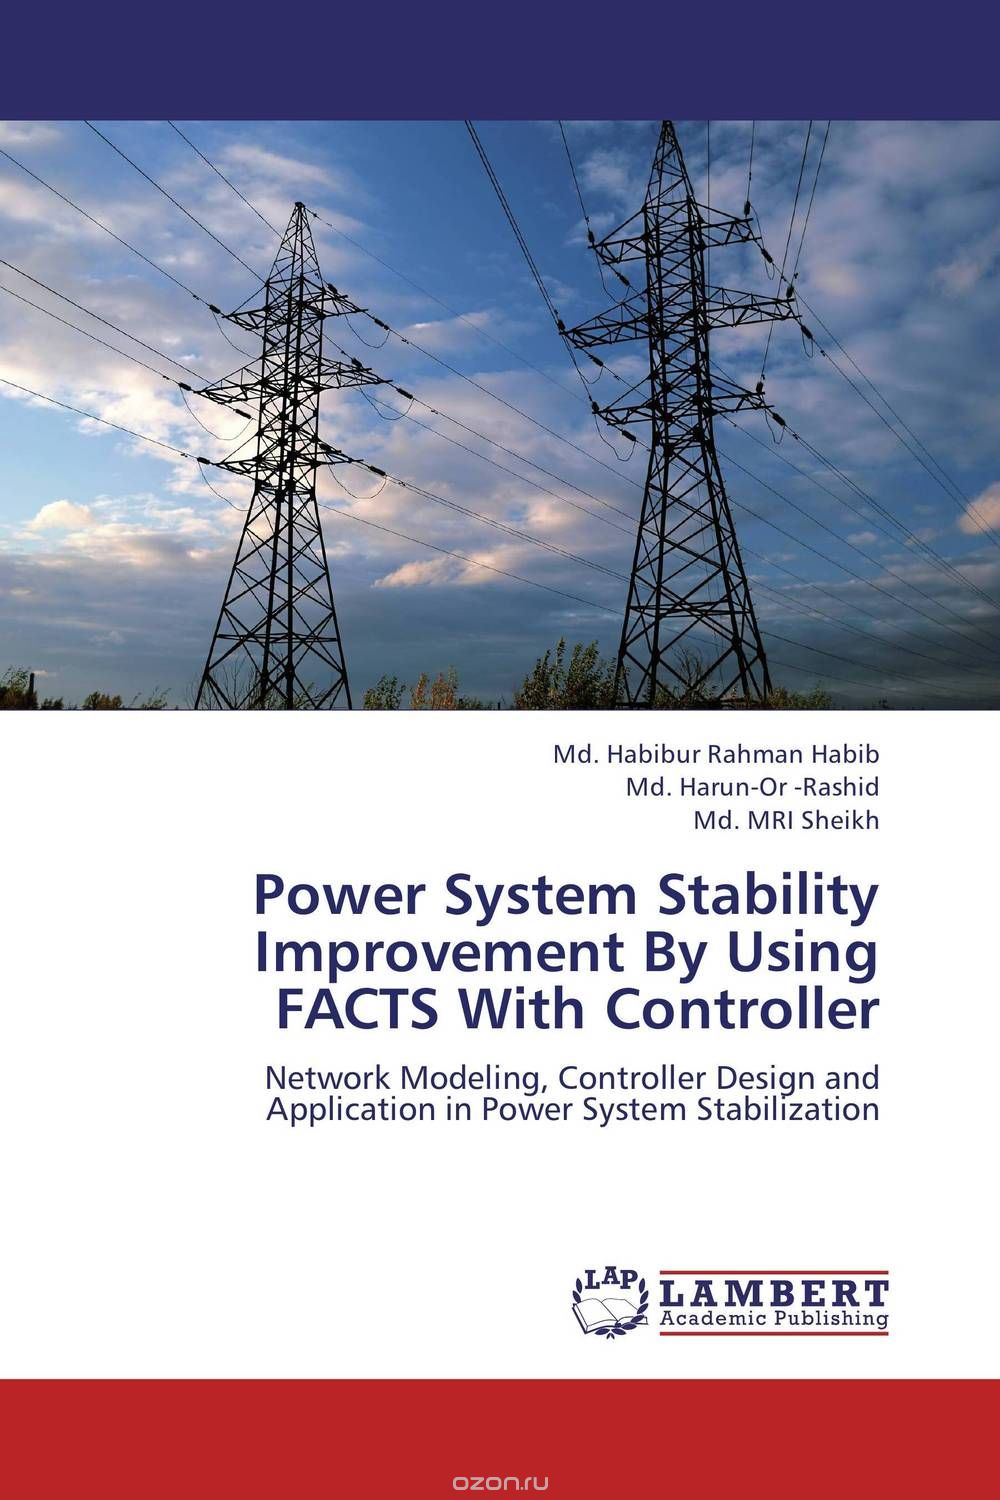 Power System Stability Improvement By Using FACTS With Controller